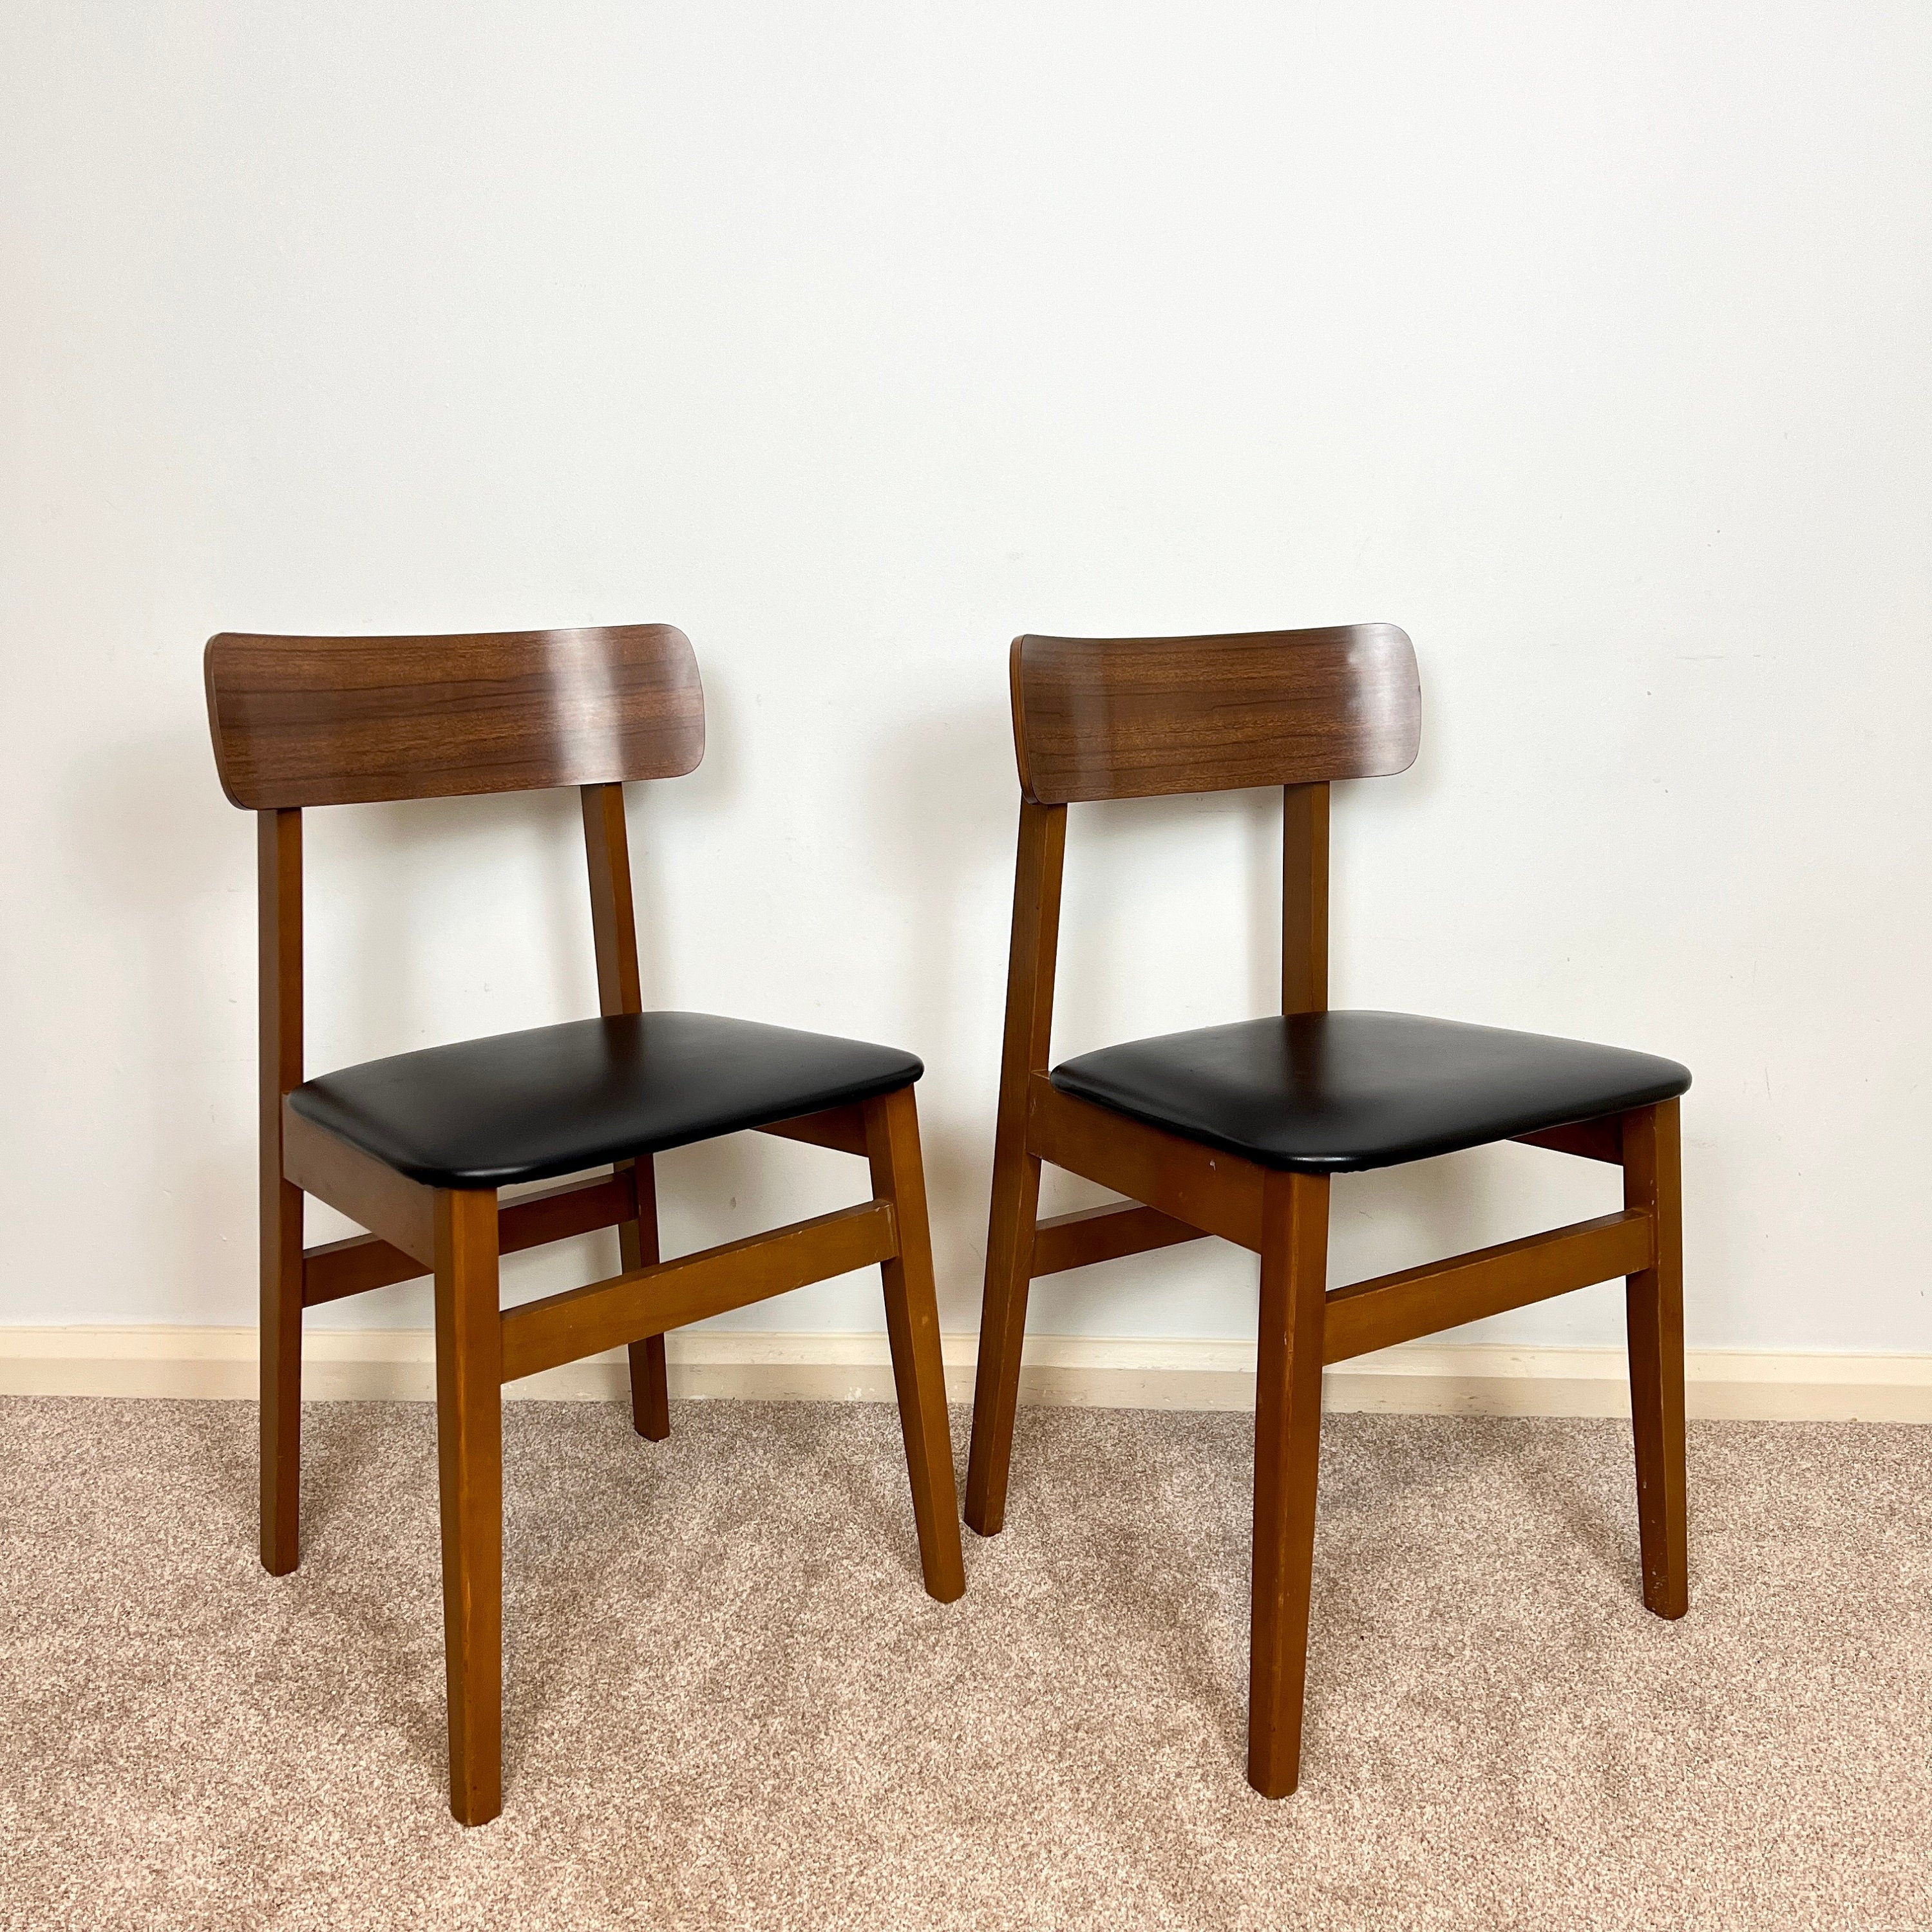 2 x Mid Century Dining Chairs, A Pair  Vintage Retro Black Easy Chairs 1970s